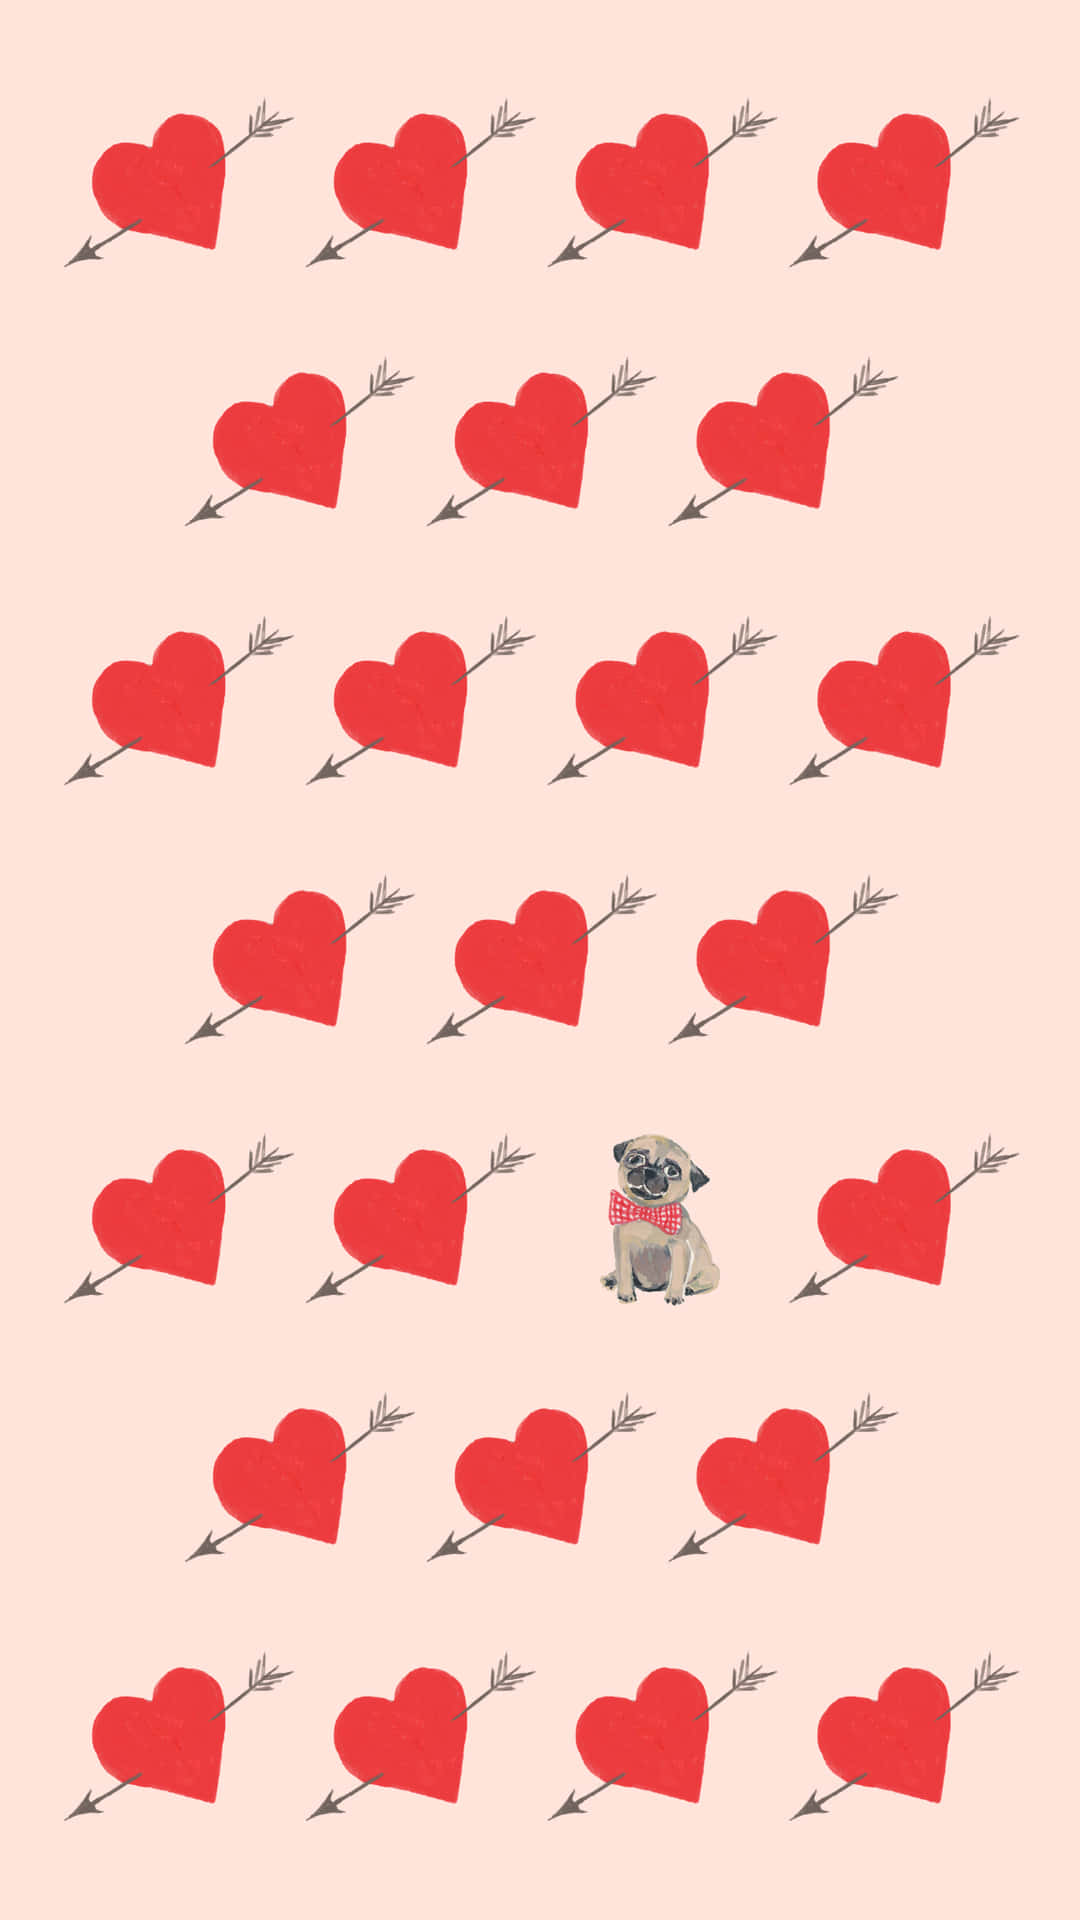 Cupid Arrow Heart And Dog Aesthetic Valentine's Day Wallpaper